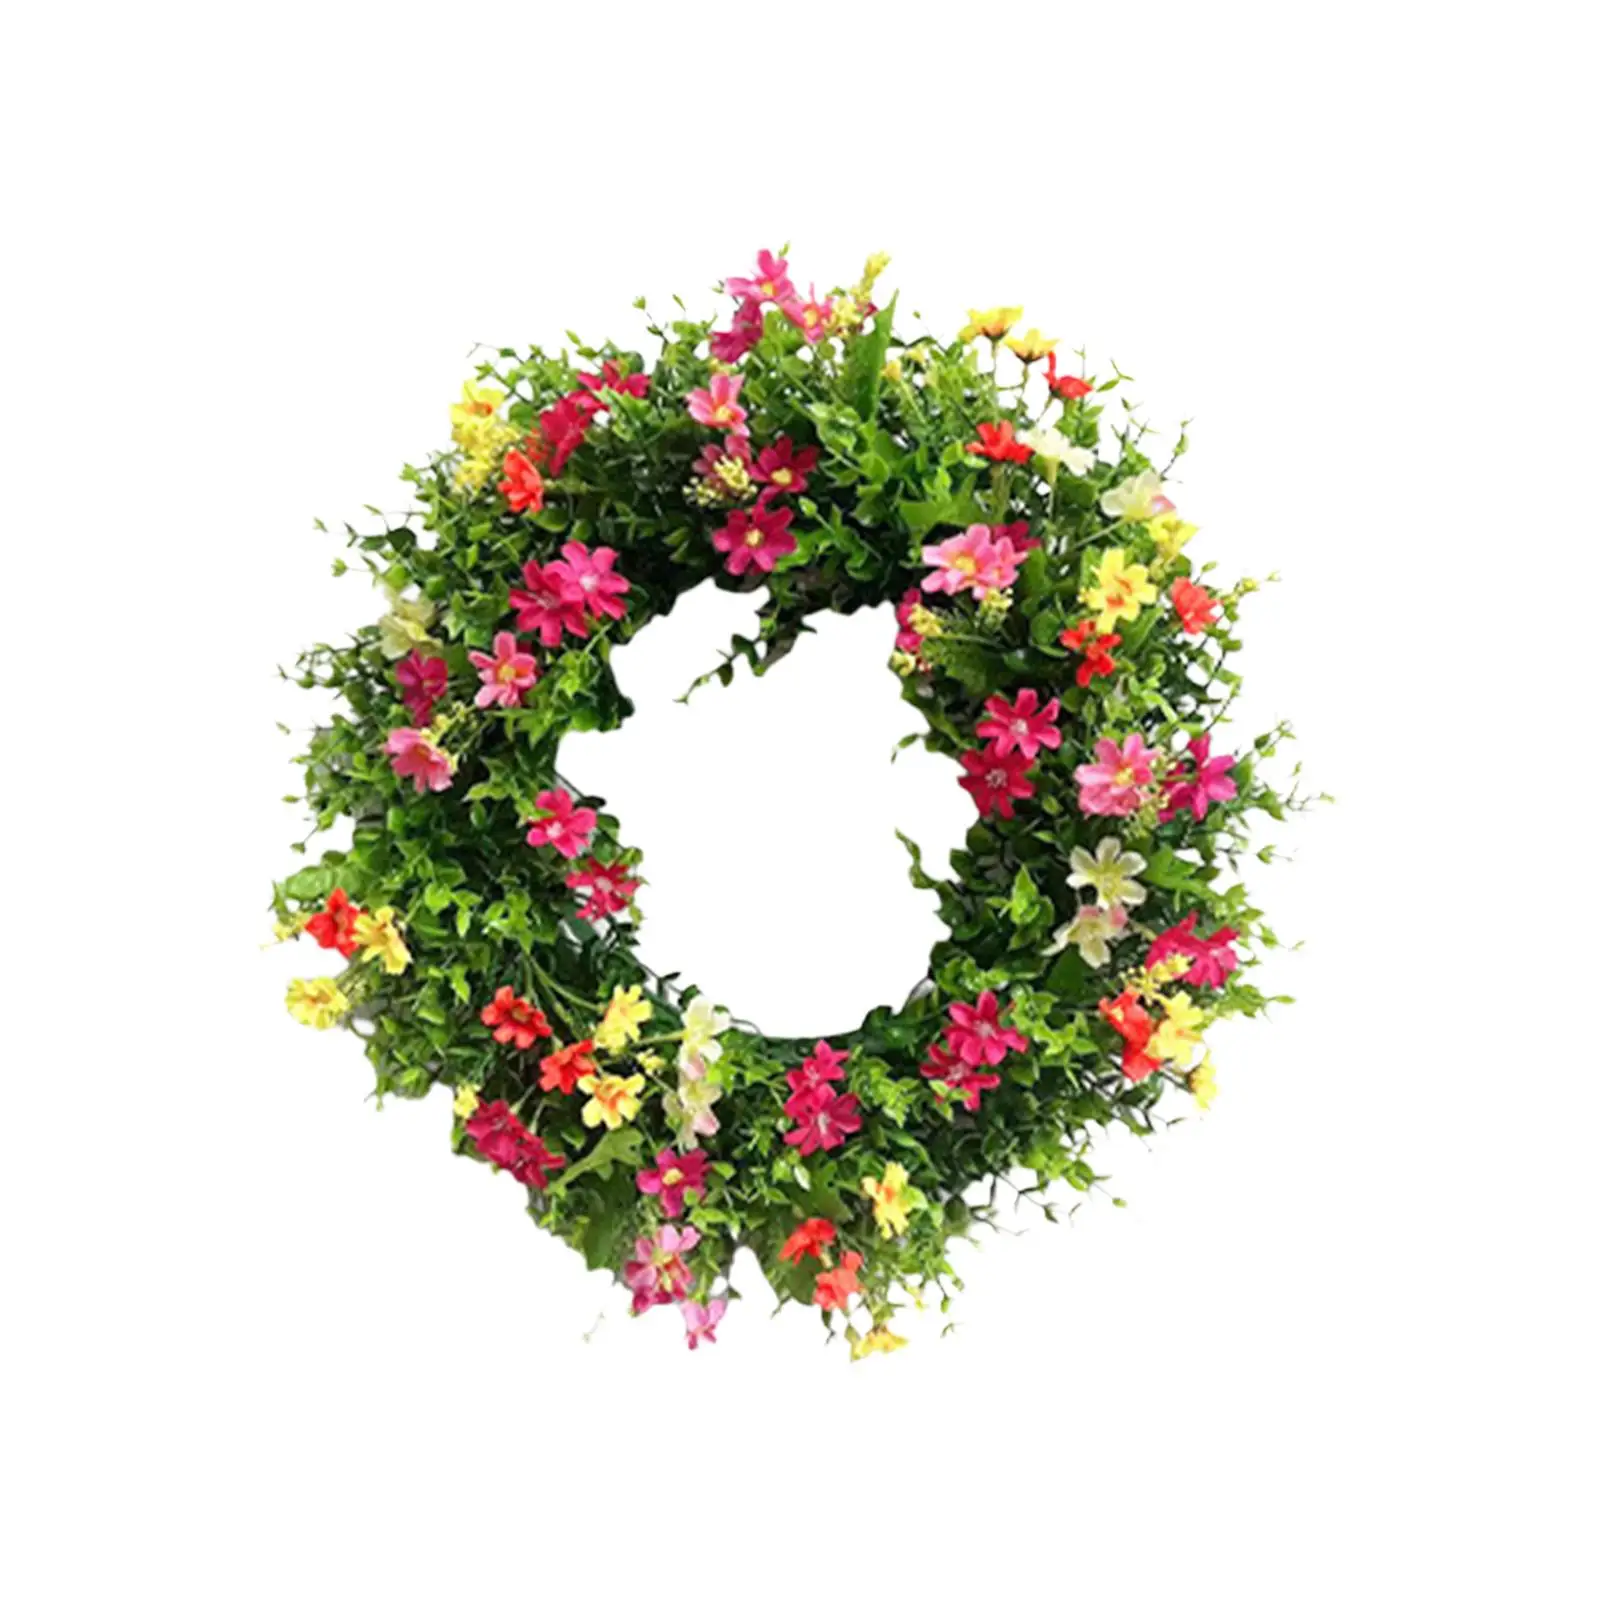 Spring Wreath Durable Simple Fashion 18 inch Wildflower Wreath Artificial Wreath for Front Door Party Holiday Porch Festival